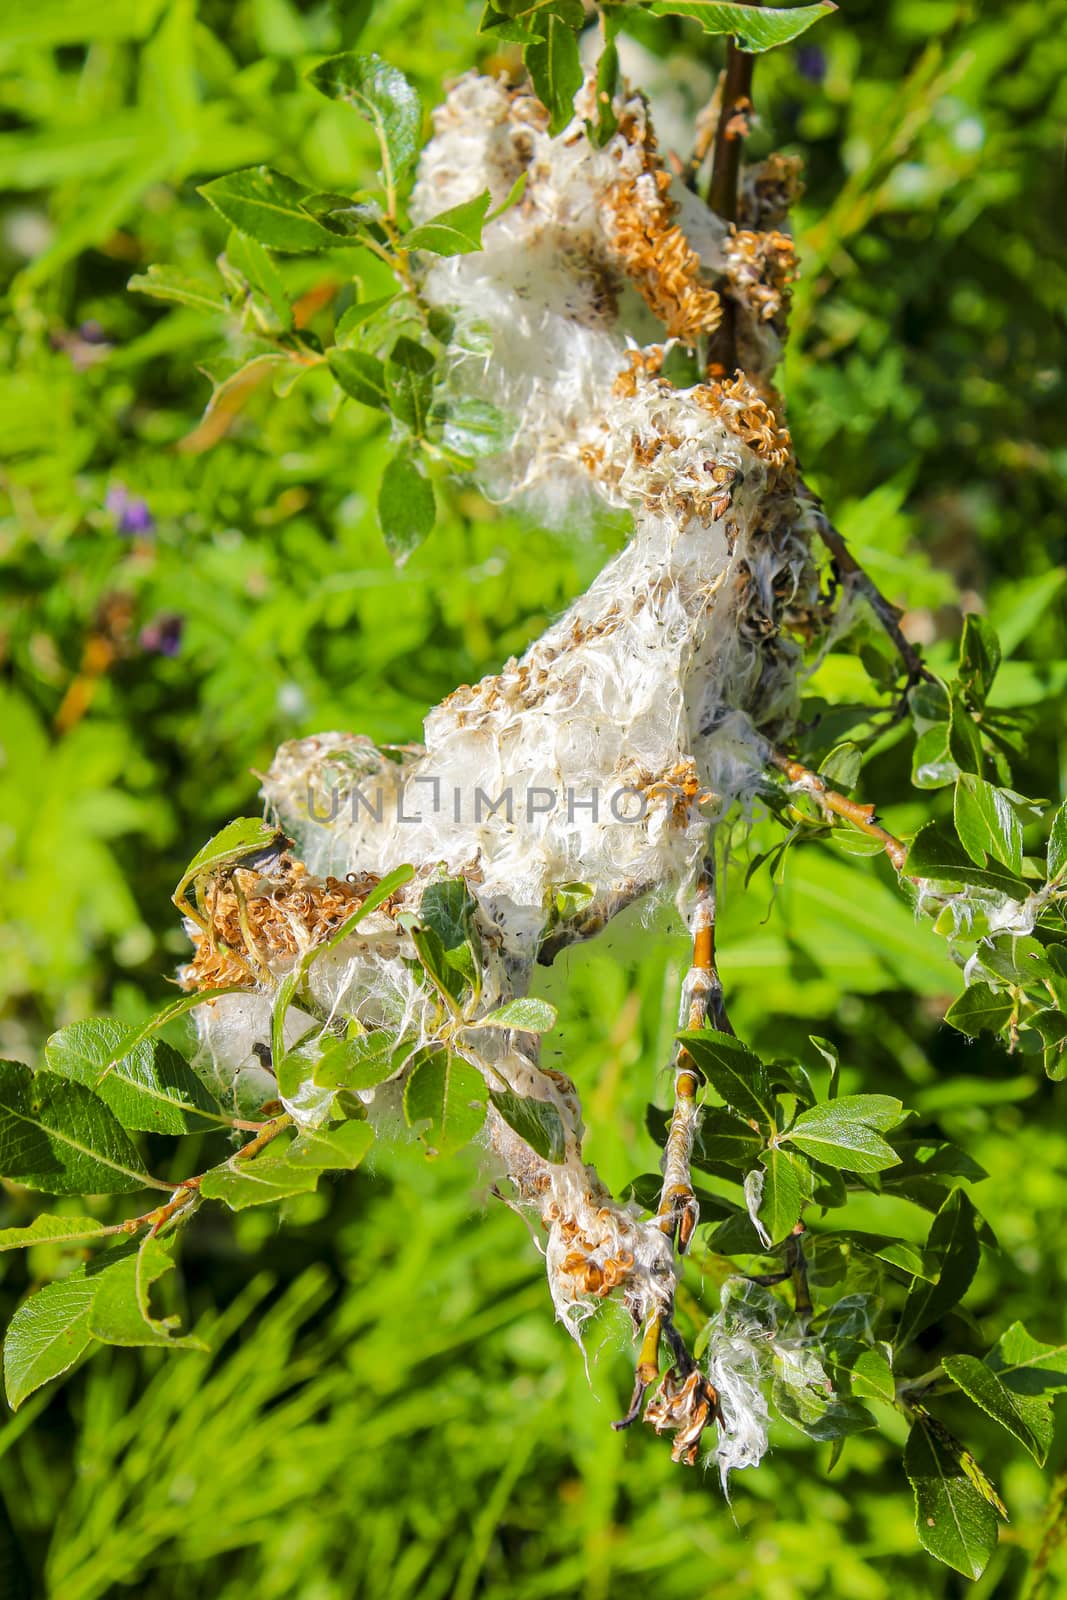 Huge insect nest made of silk thread and weave, Norway. by Arkadij